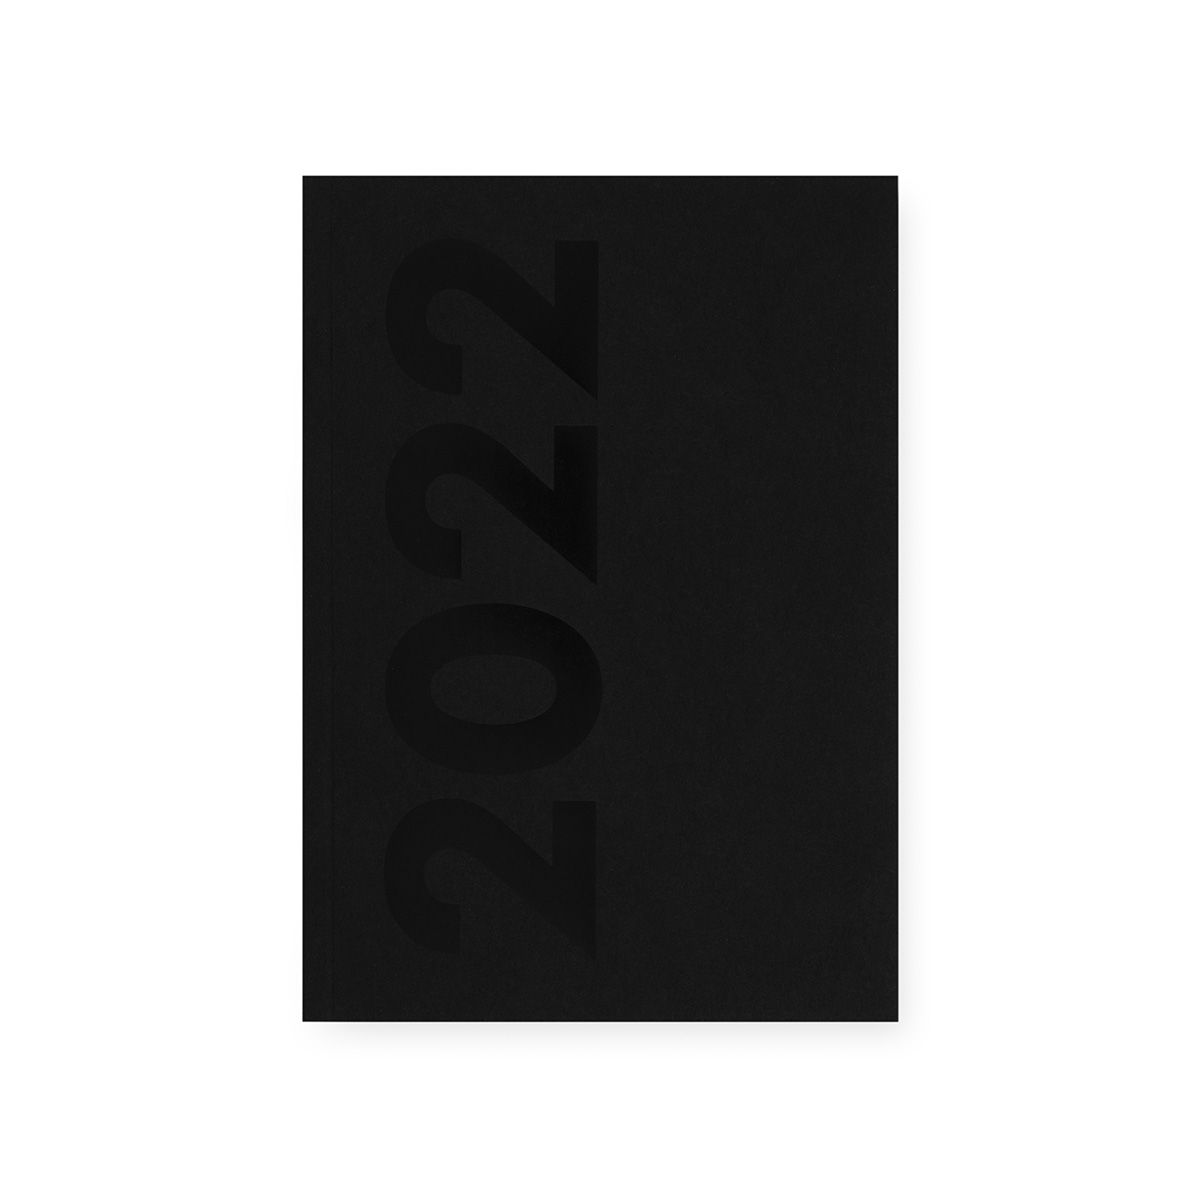 Diary 2022 INSERT BOOKLET Ordning and Reda